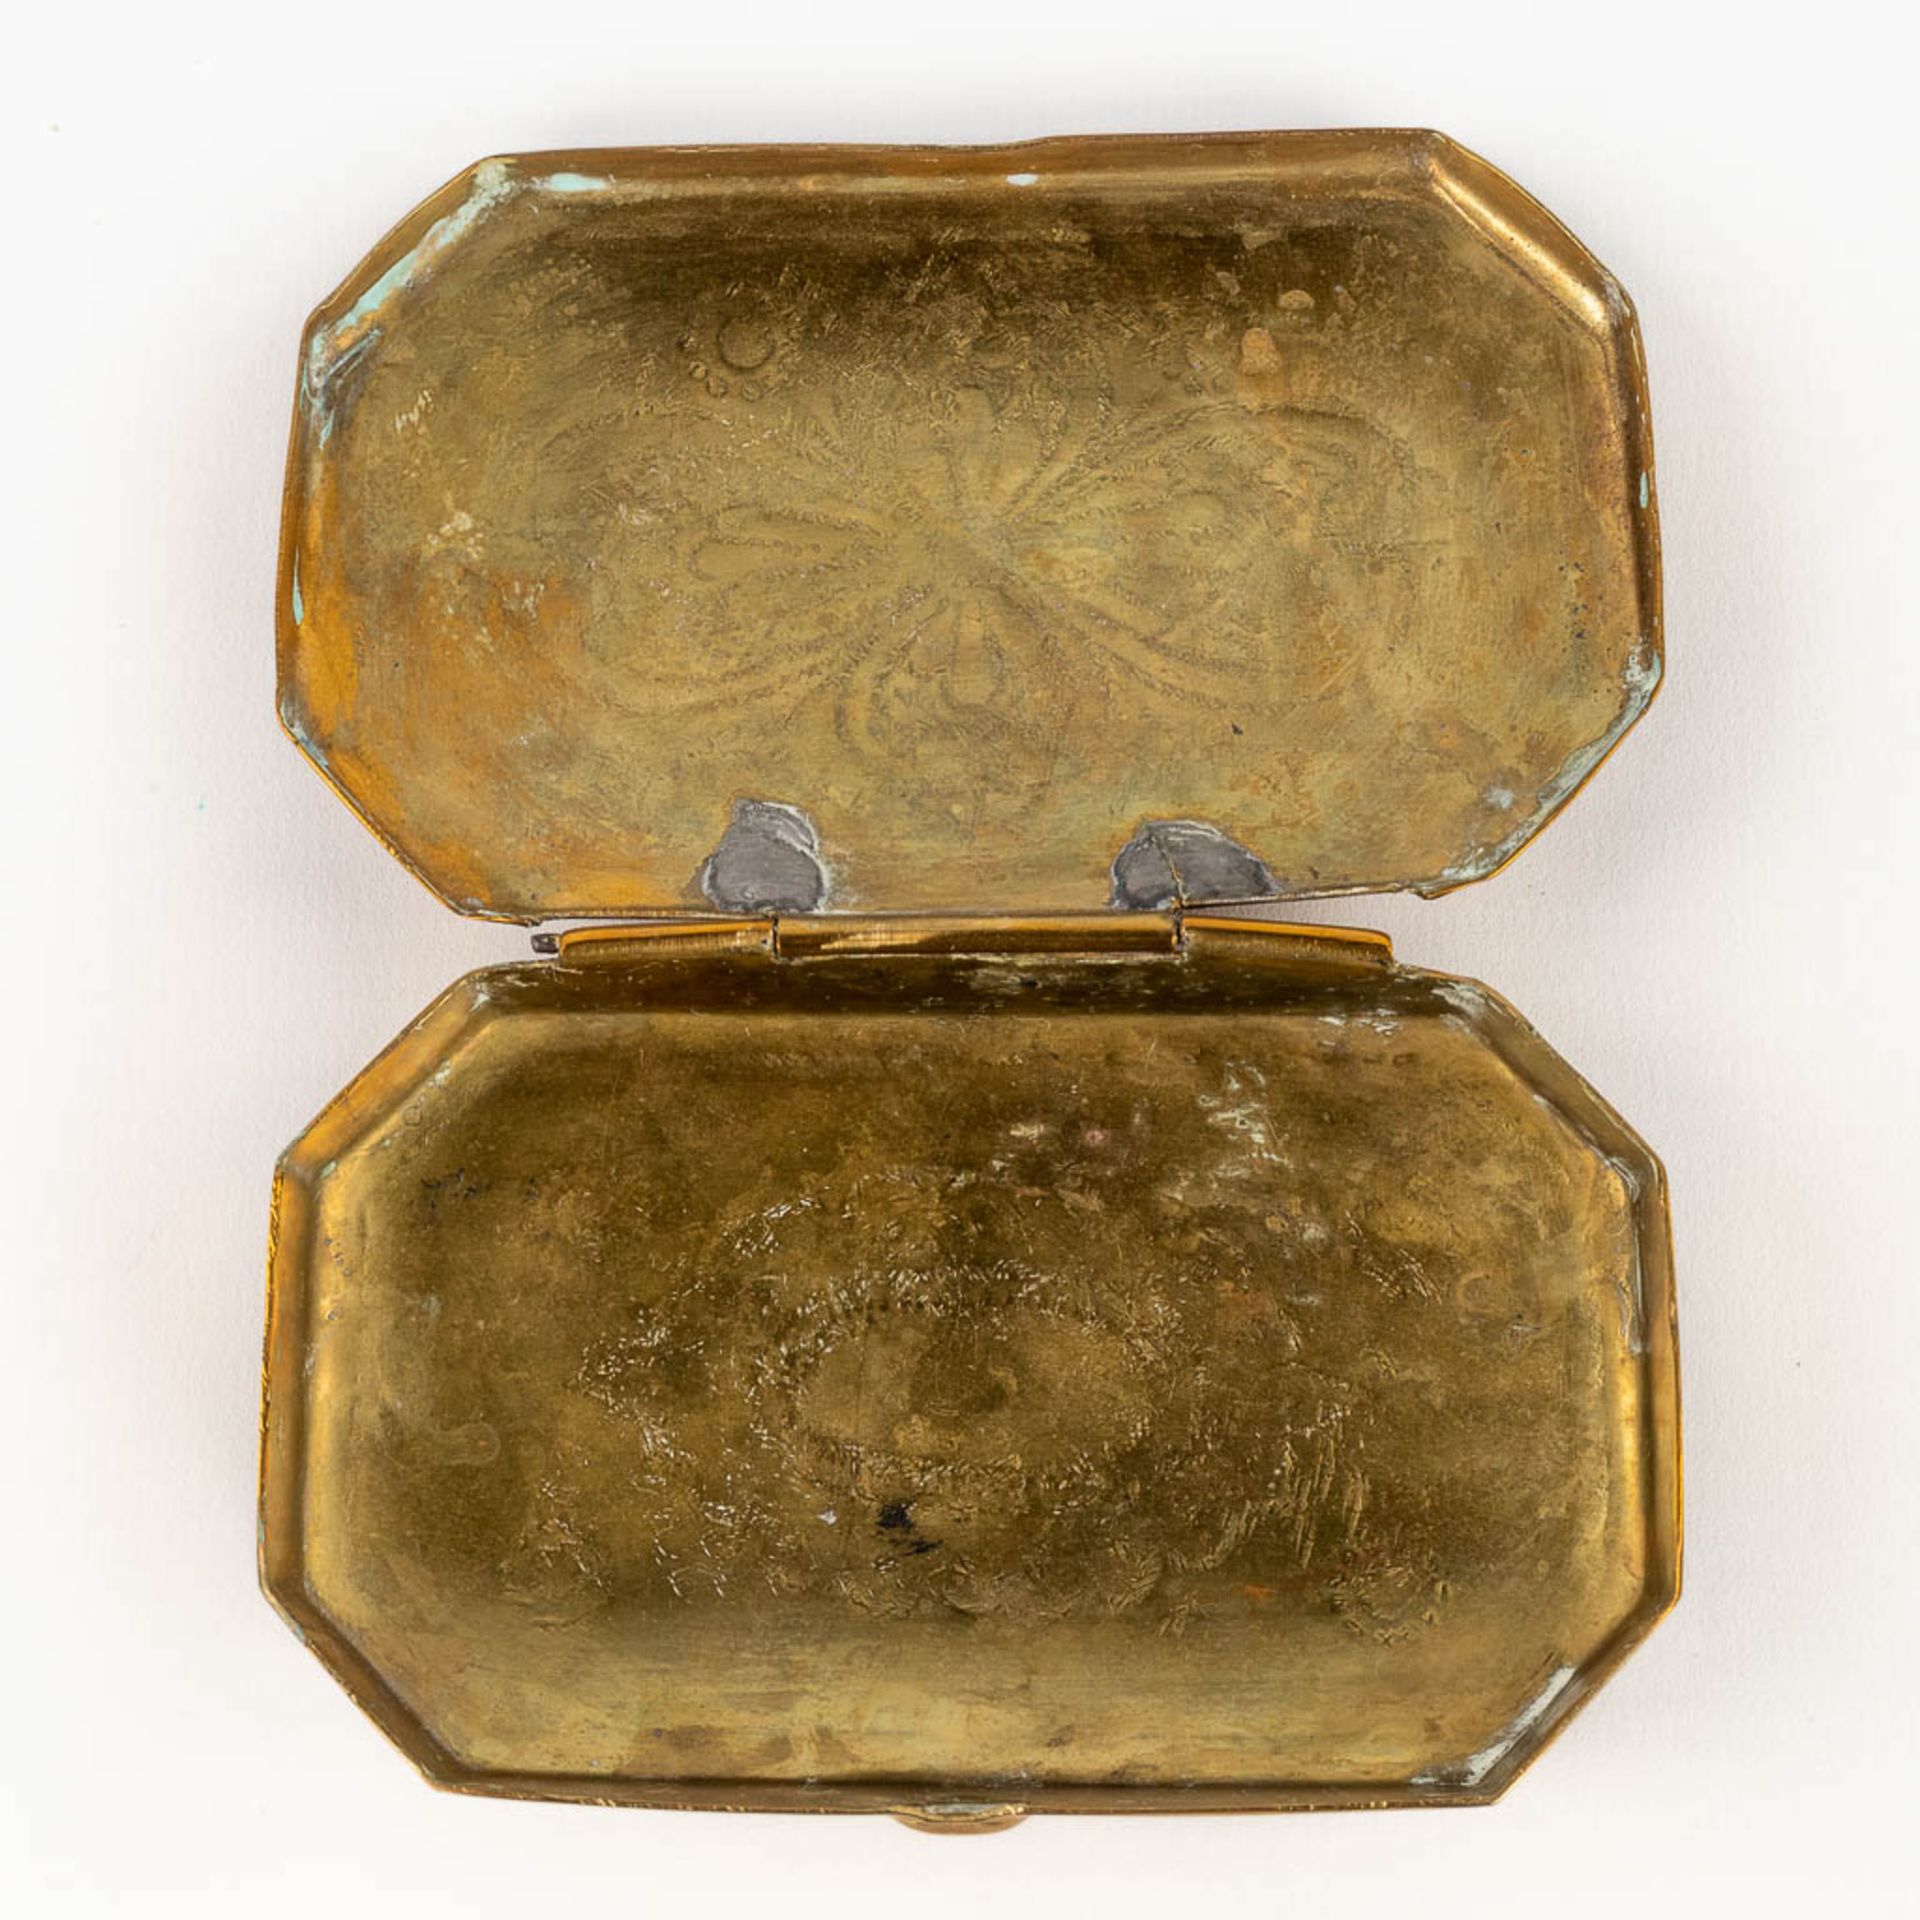 A collection of 3 antique oval tobacco boxes, made of copper. 18th/19th C. (L: 7 x W: 12 x H: 3,5 cm - Image 6 of 13